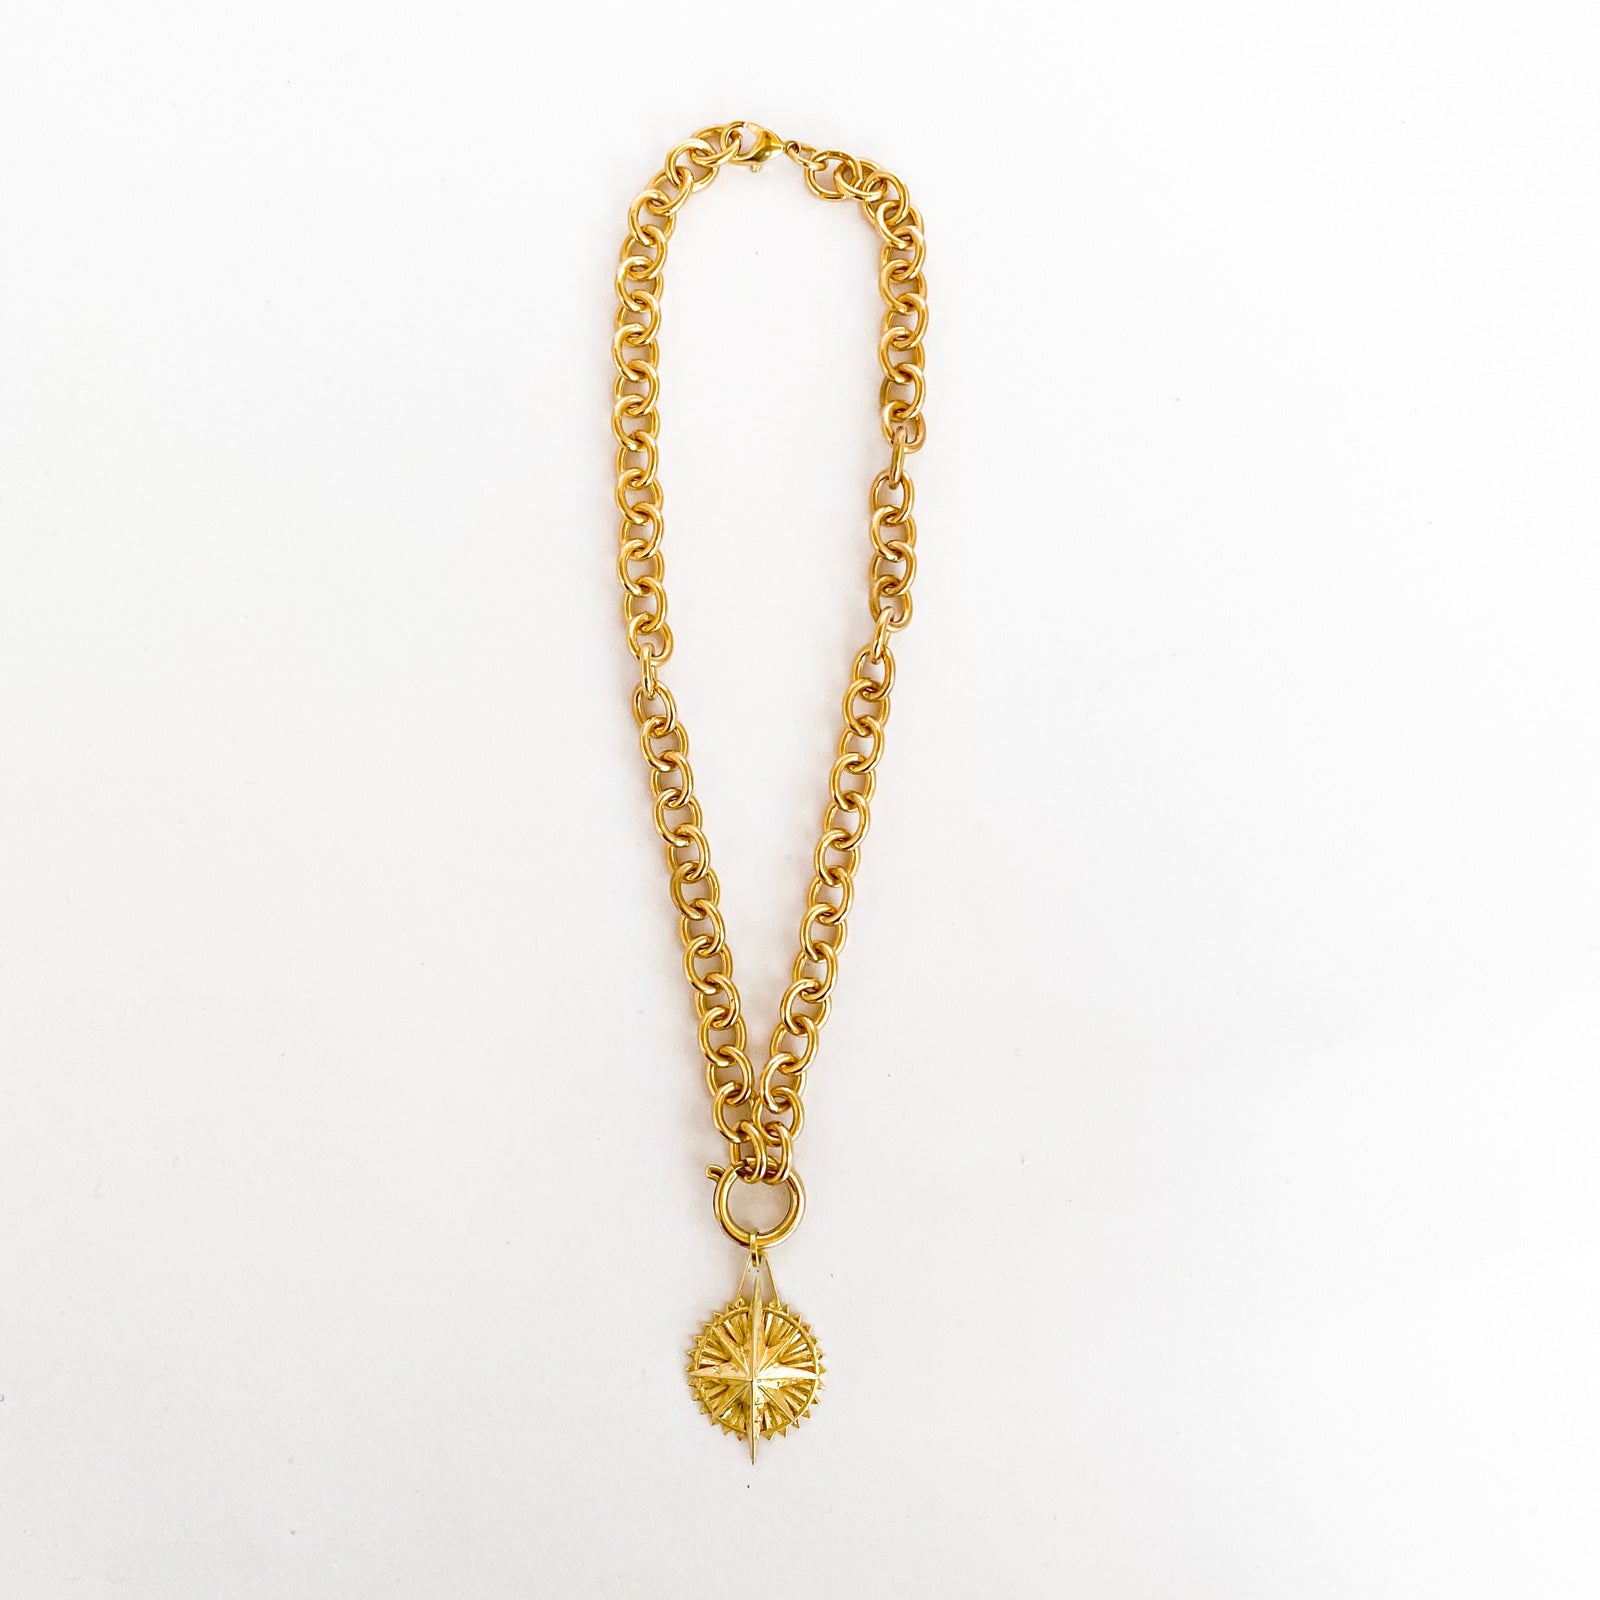 bold-chains-gold-medallions-mystic-jewelry-ana-buendia